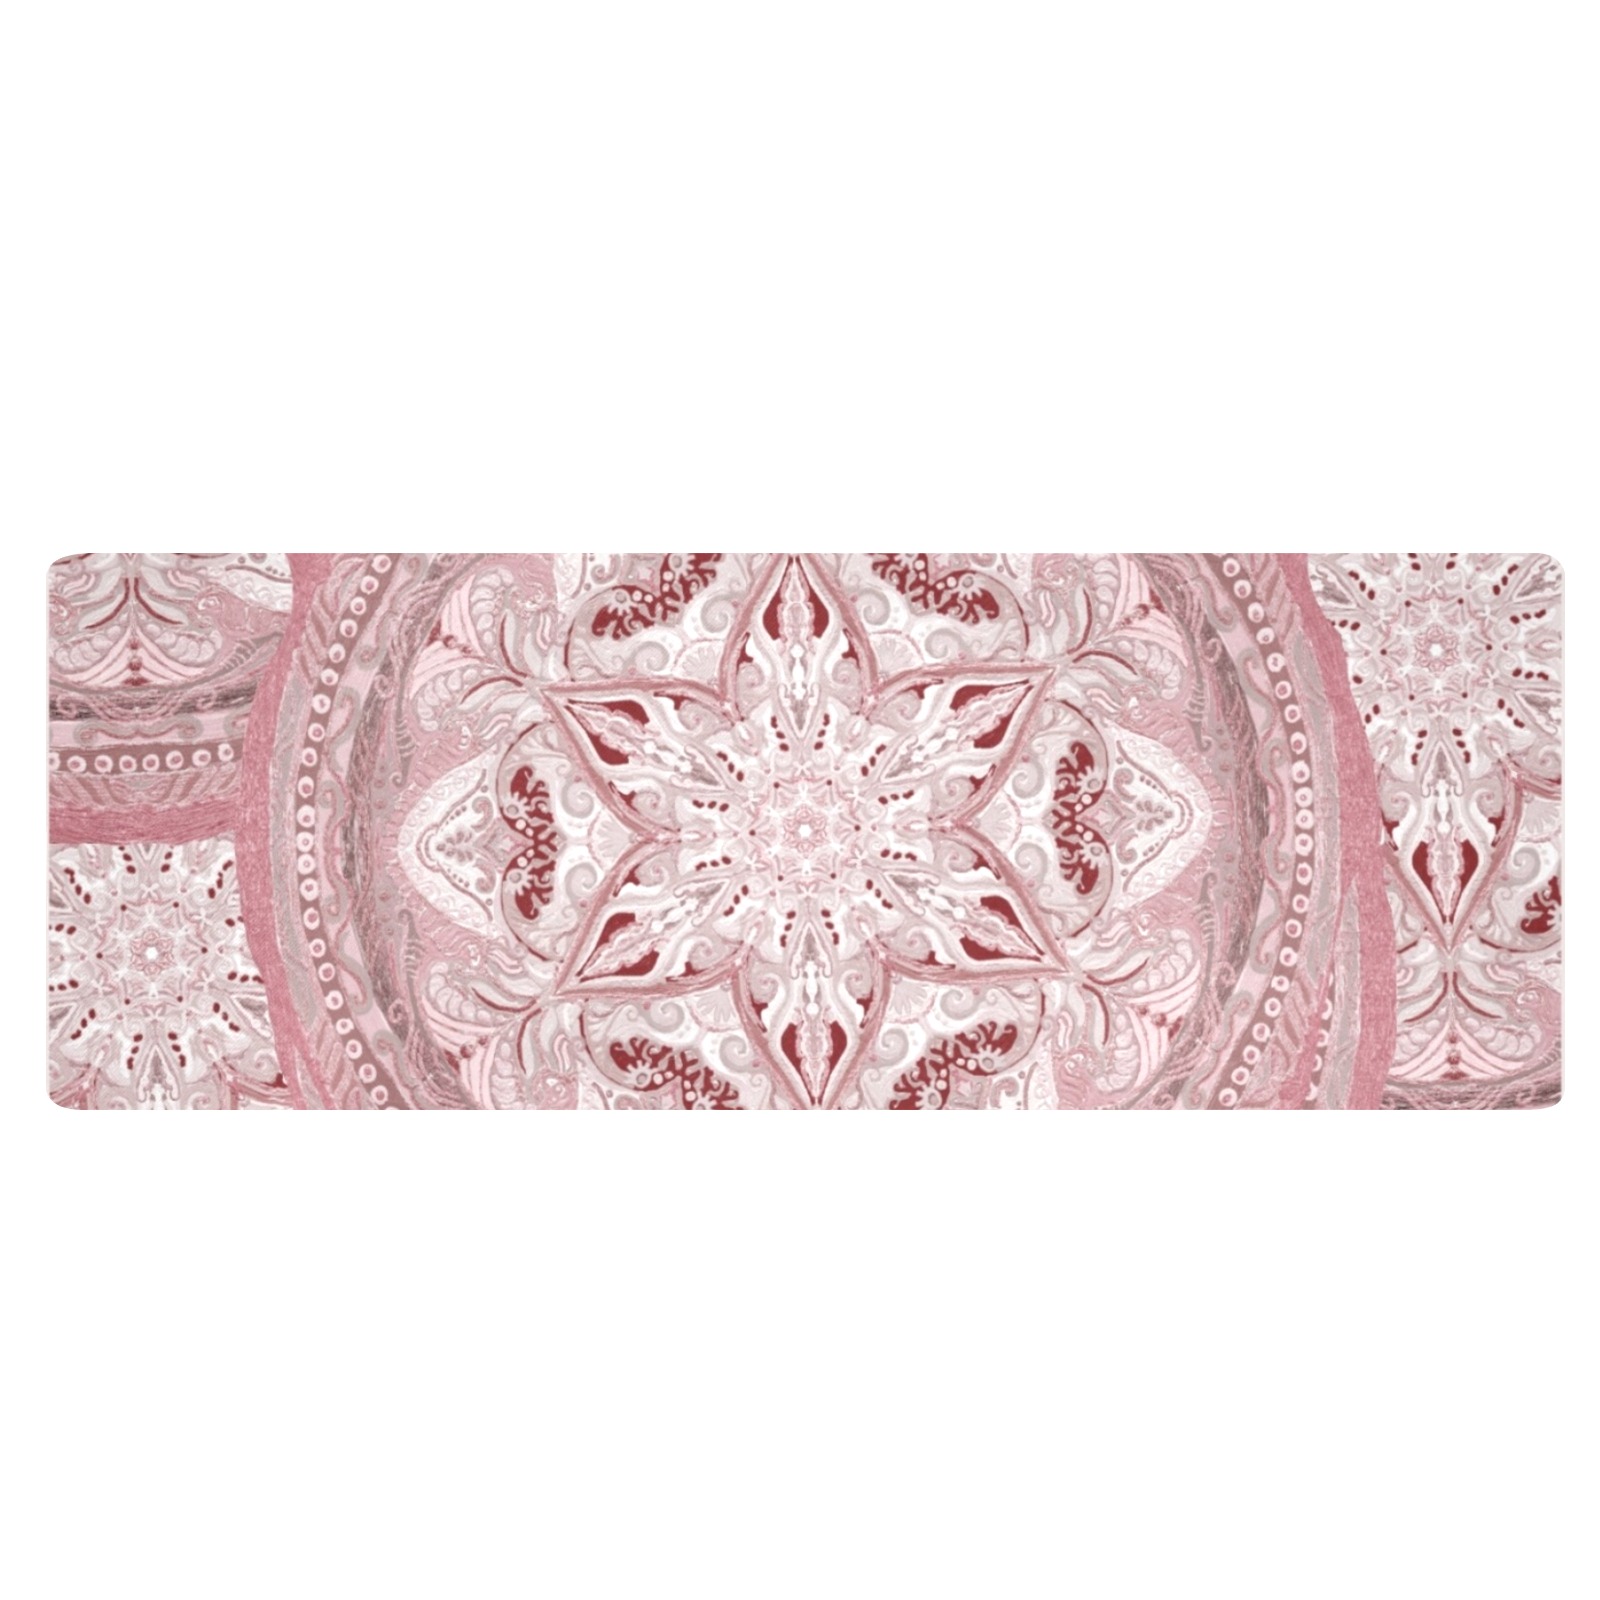 embroidery-pale pink and gray Kitchen Mat 48"x17"